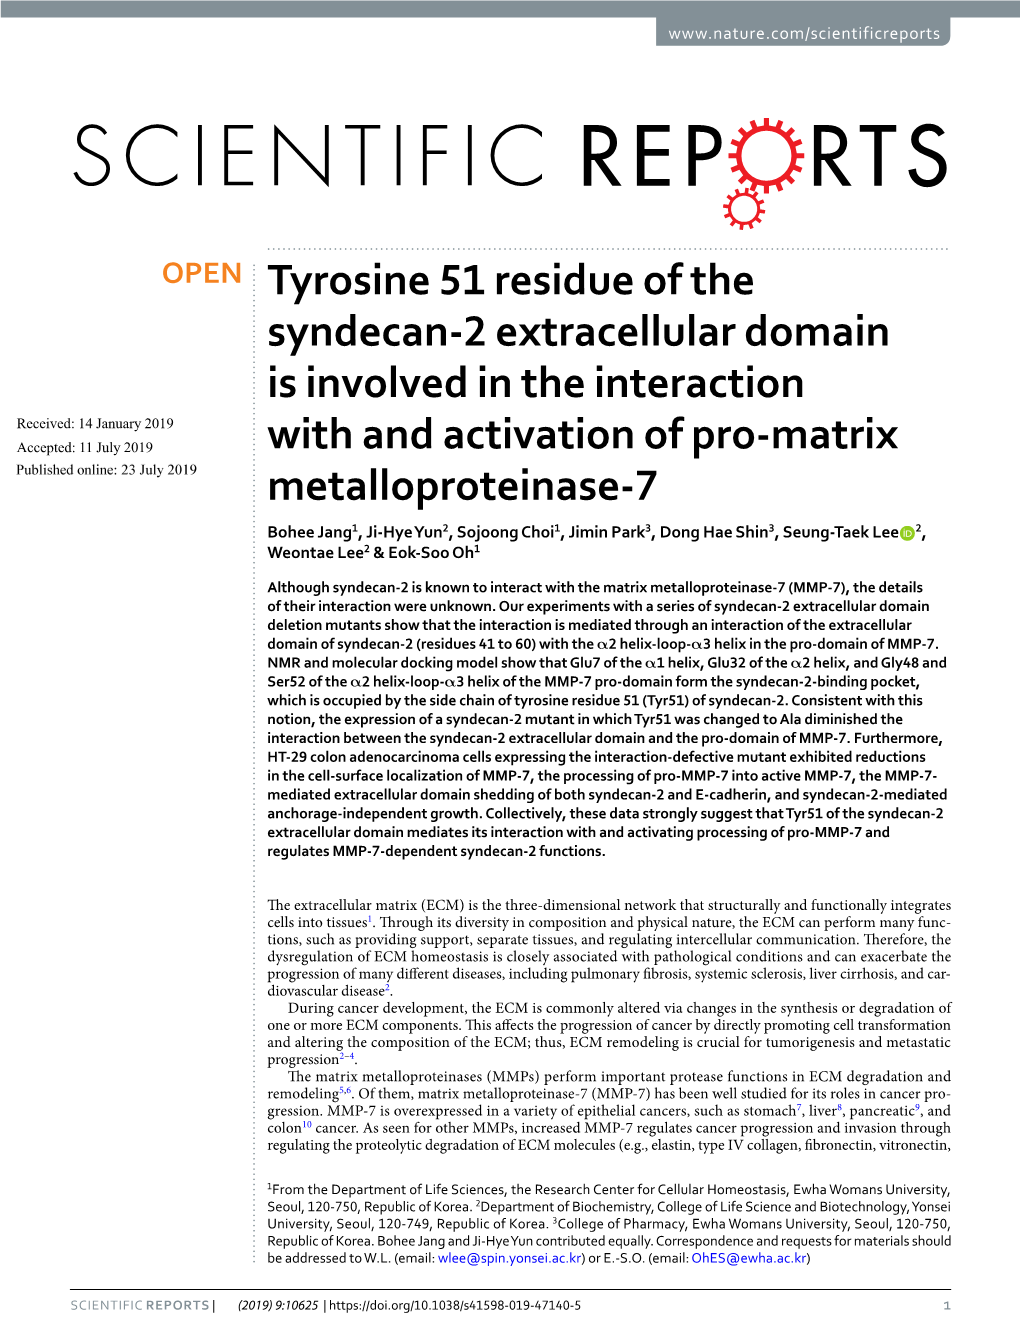 Tyrosine 51 Residue of the Syndecan-2 Extracellular Domain Is Involved in the Interaction with and Activation of Pro-Matrix Meta